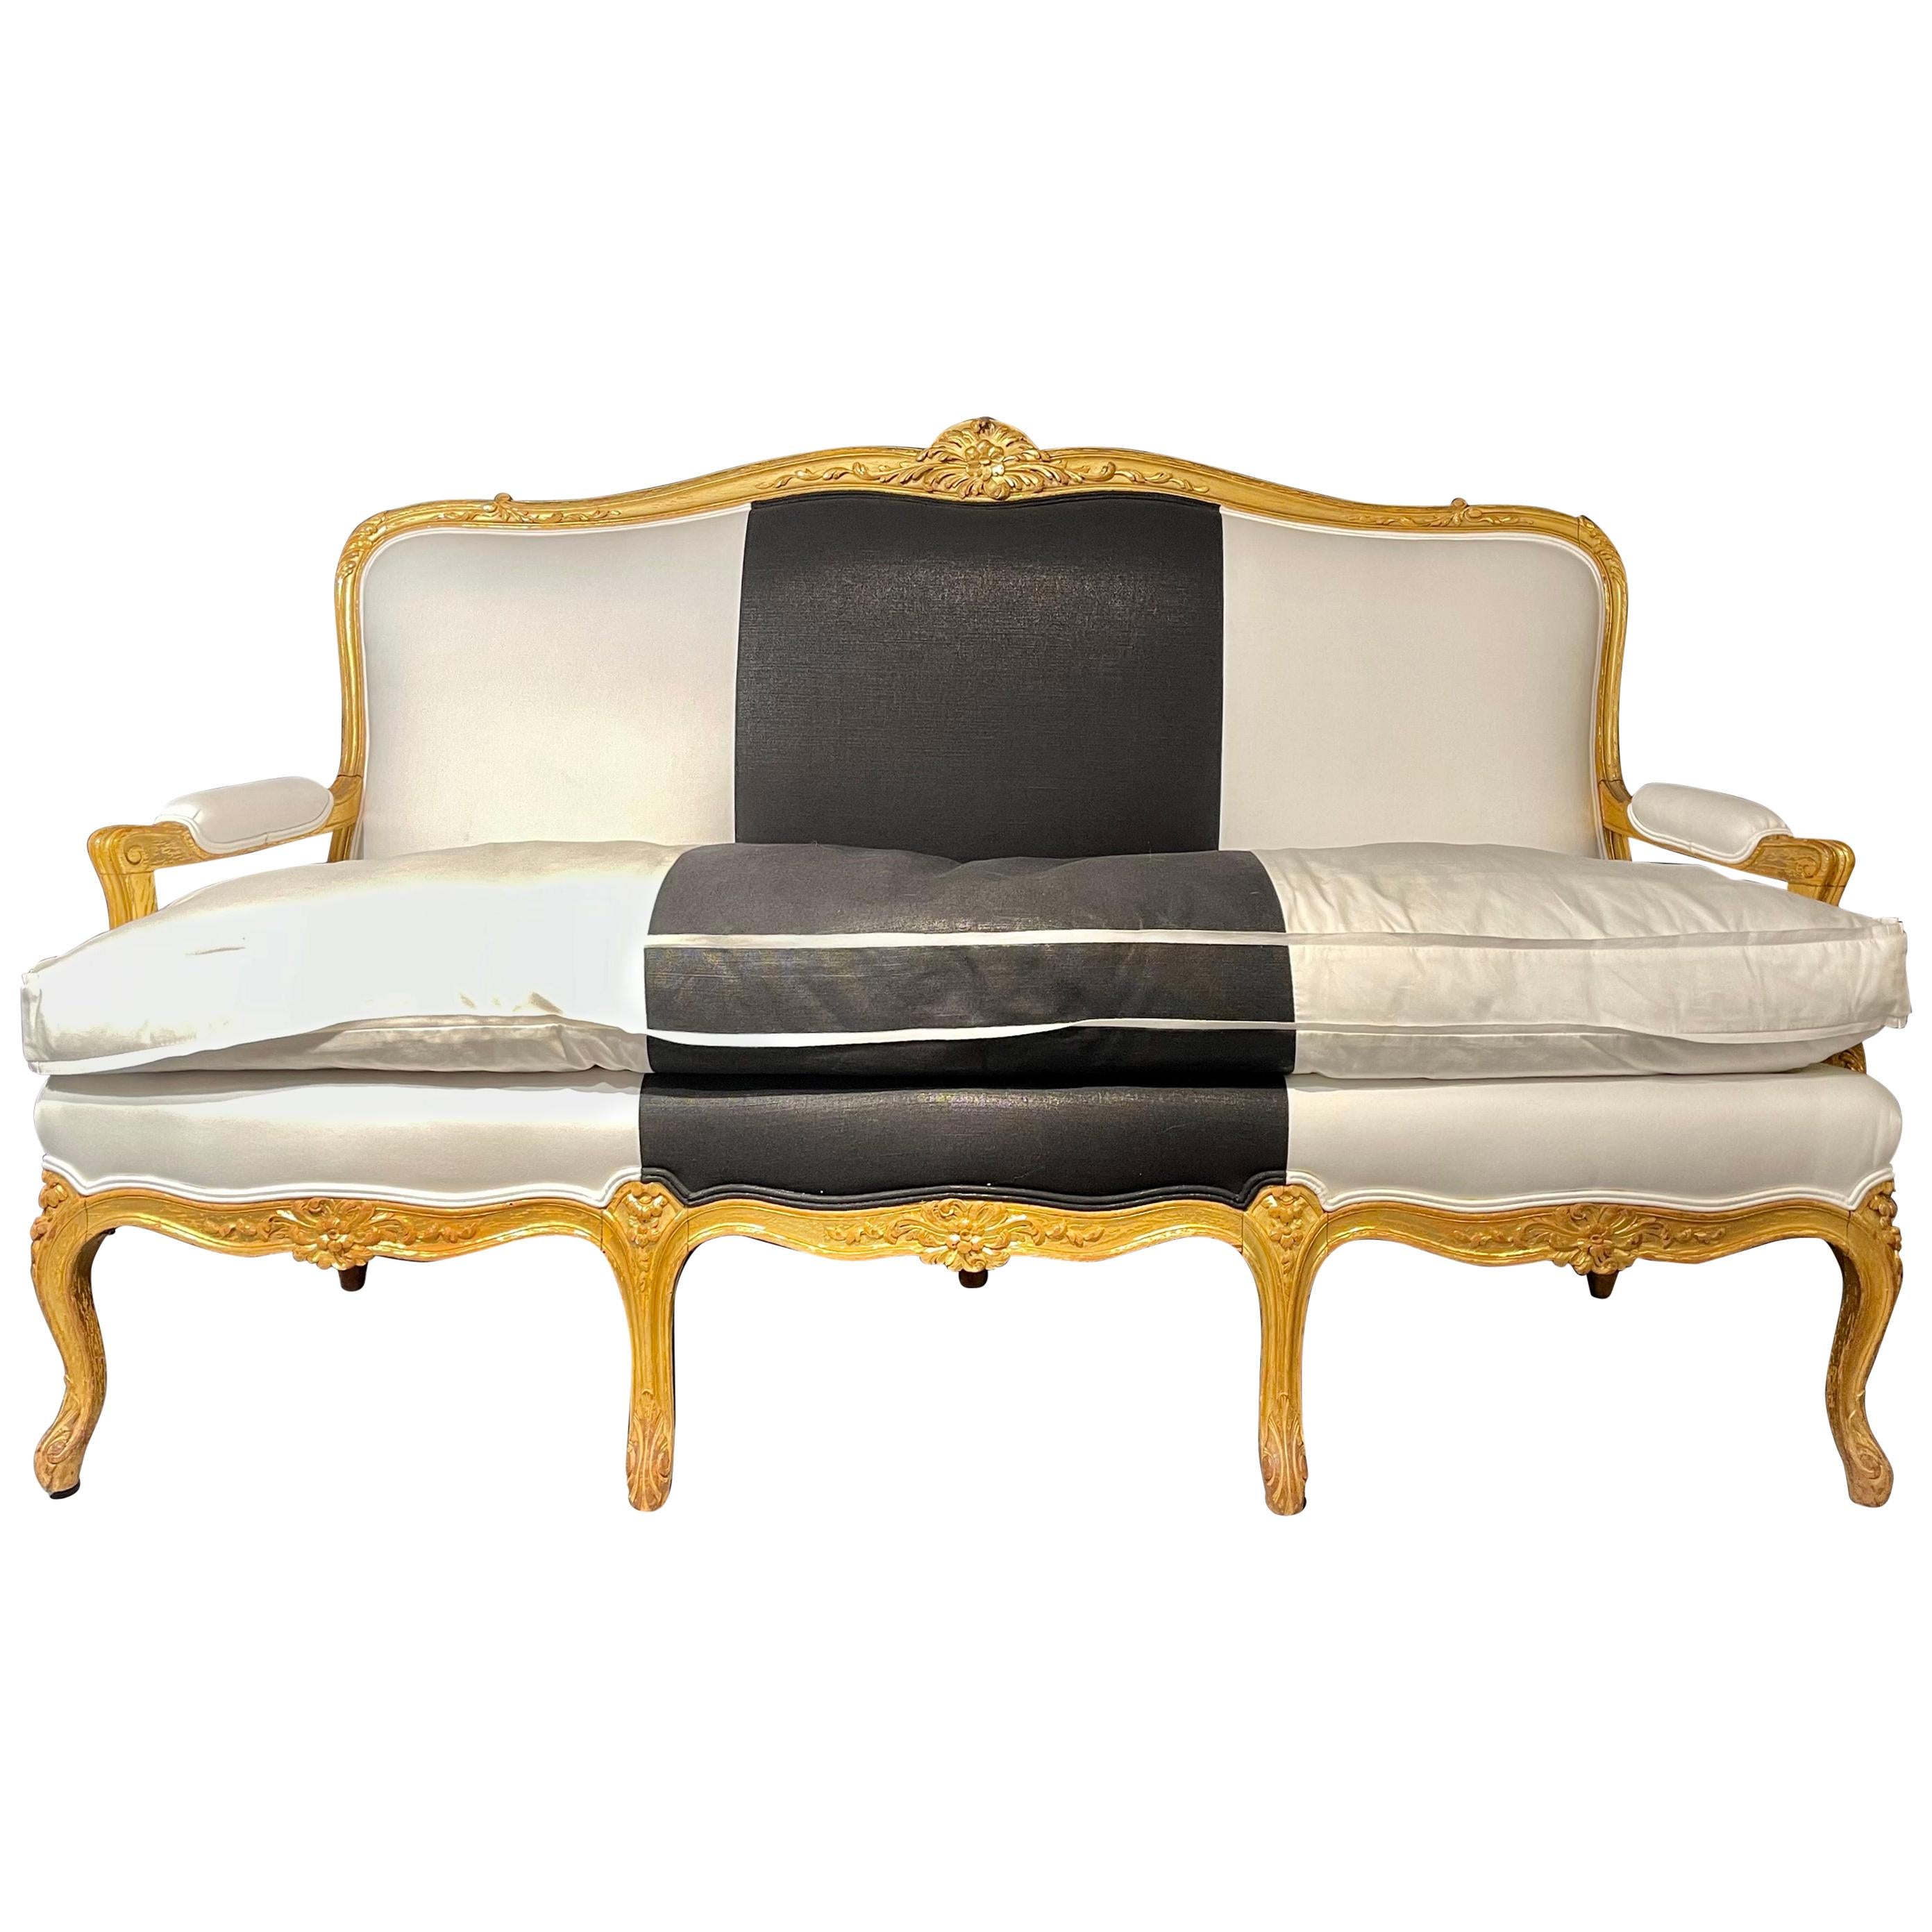 1920s French Settee, Sofa or Canape One of Two in Gilt Wood Polished Cotton